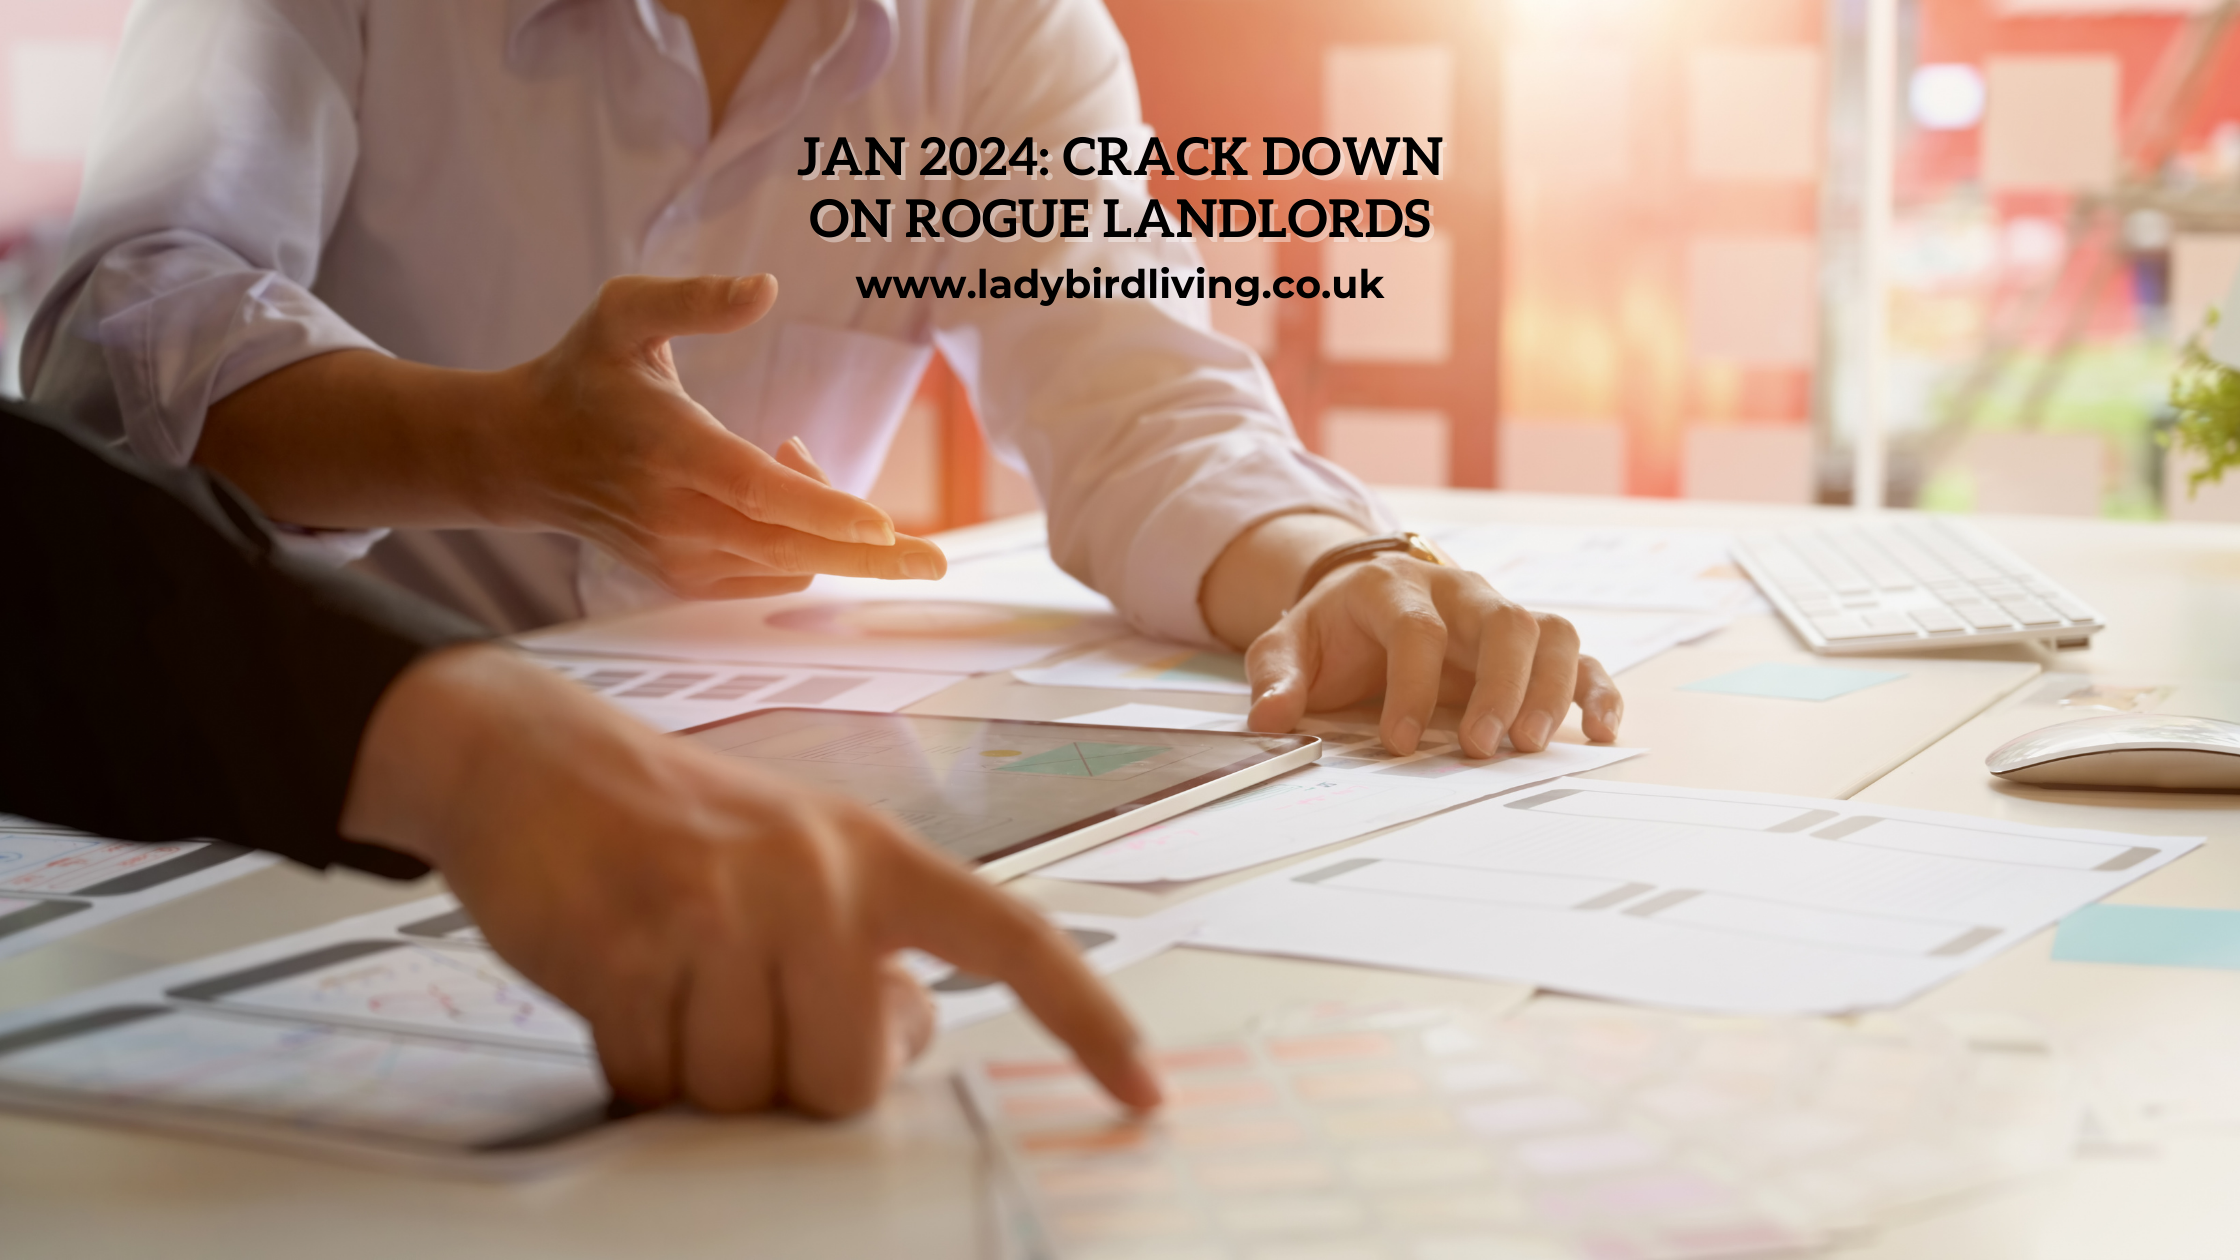 Jan 2024 Crack down on rogue landlords